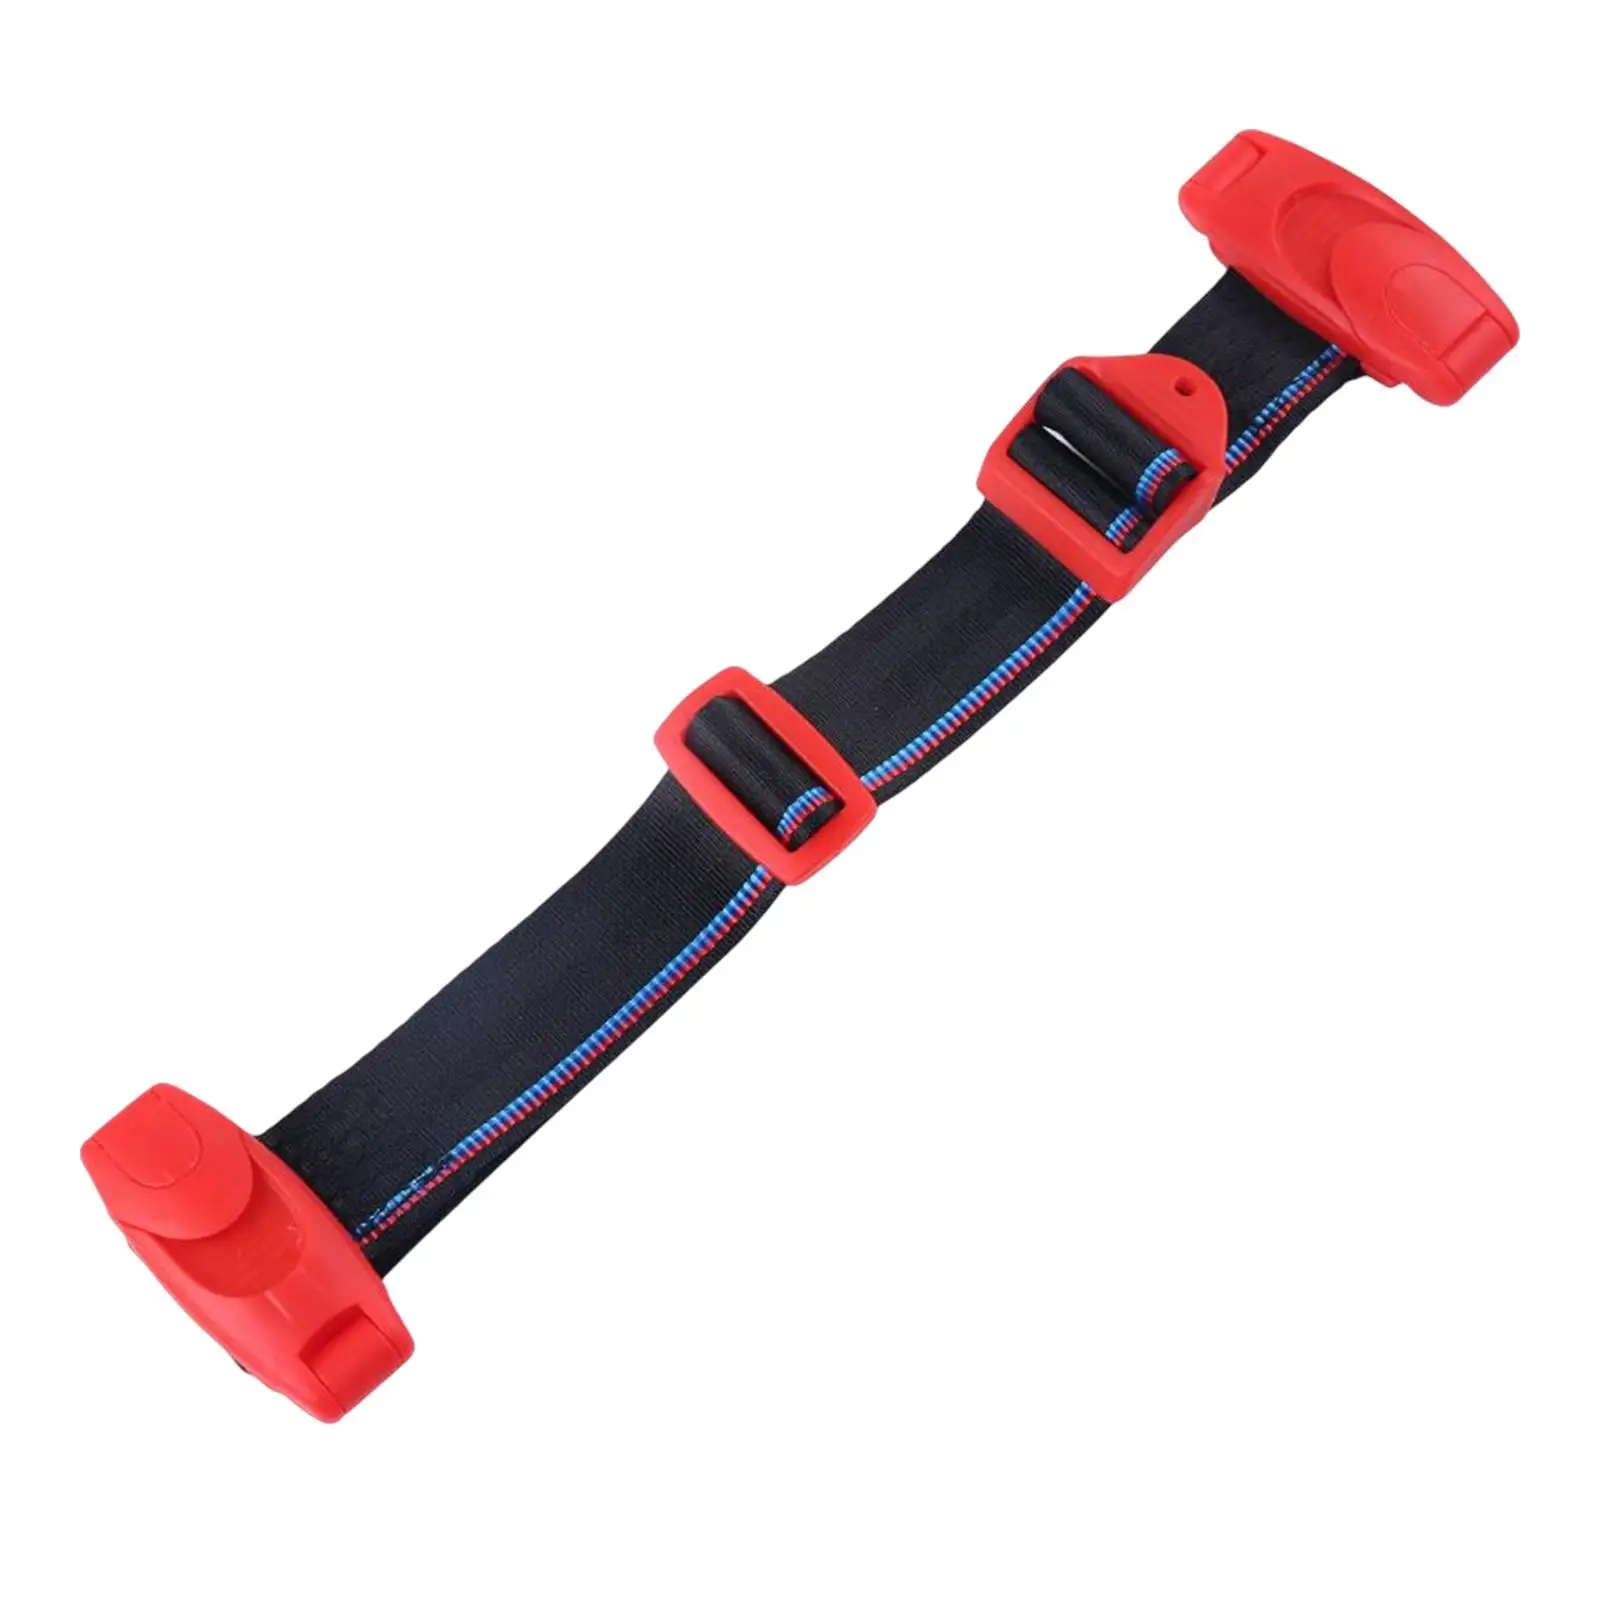 Automotive Kids Seat Belt Adjuster Seat Belt Buckle Seat Chest Clip Protection for Prevent Kids Neck from Getting Stuck